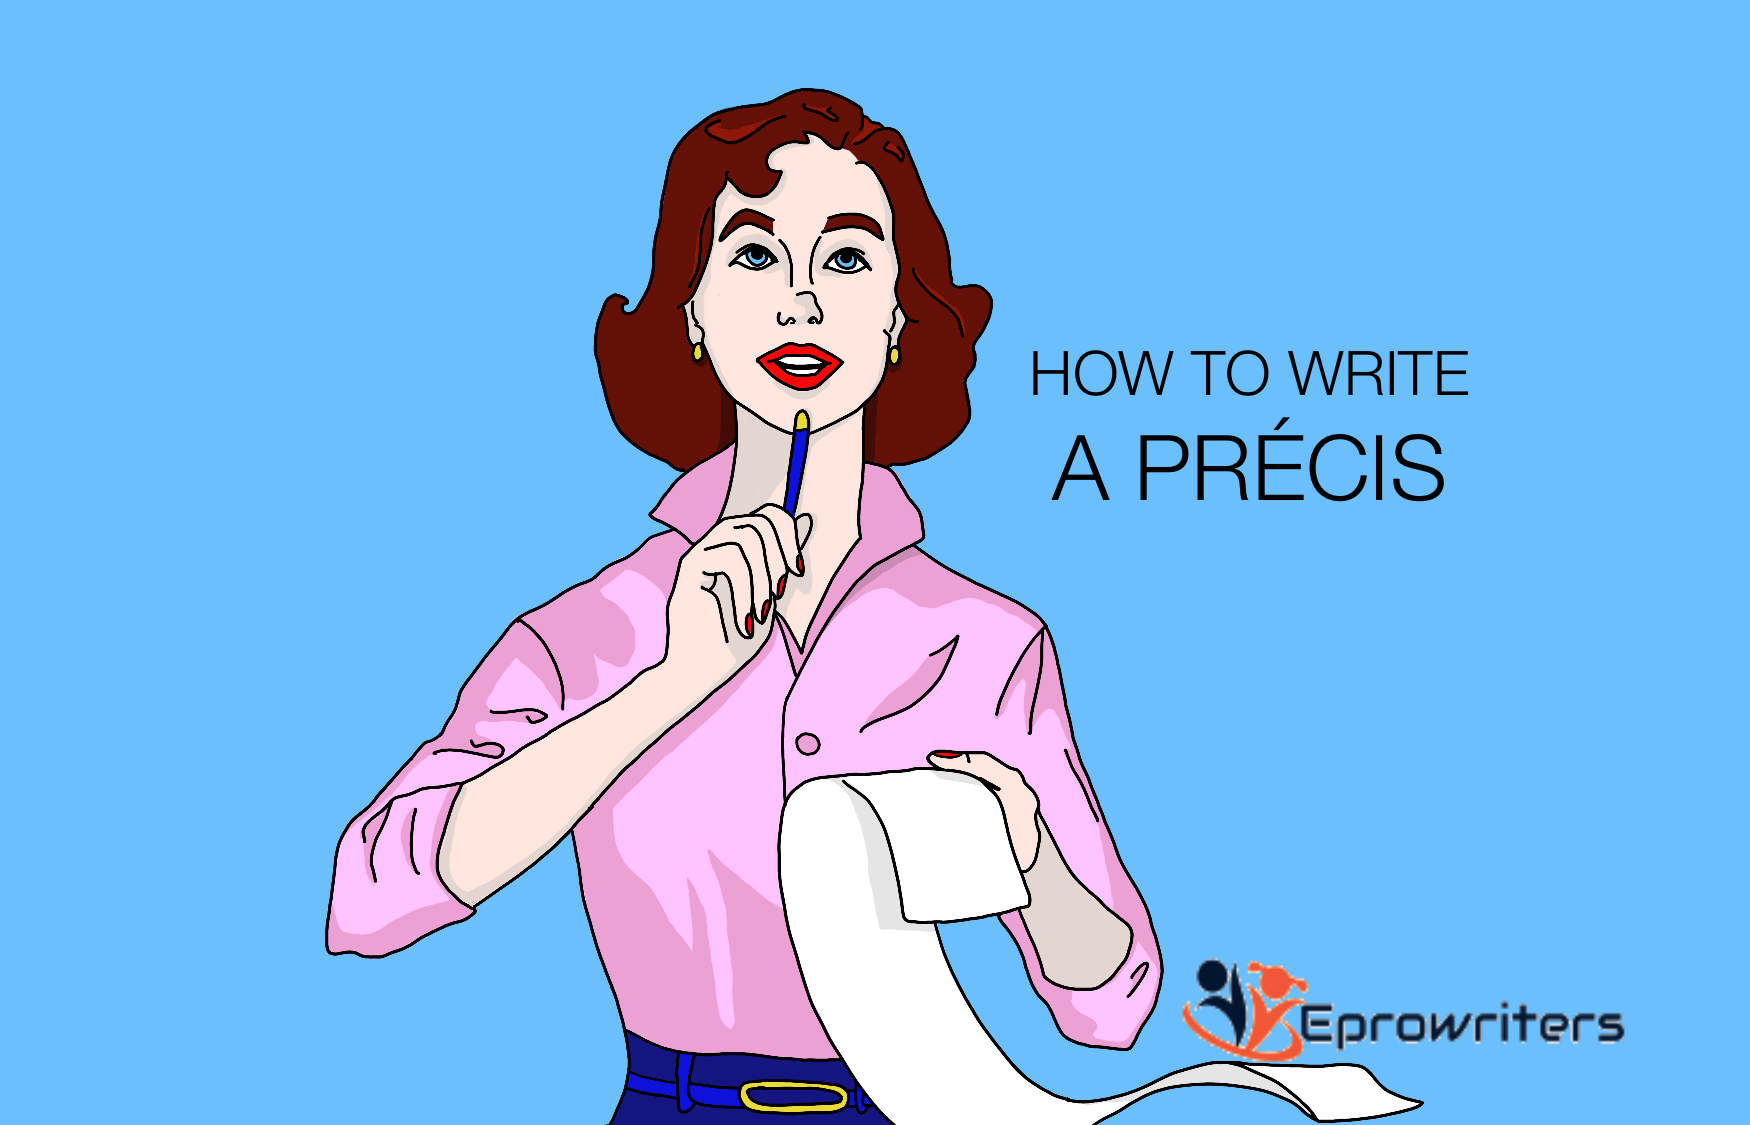 Step-by-Step Instructions for Writing a Précis